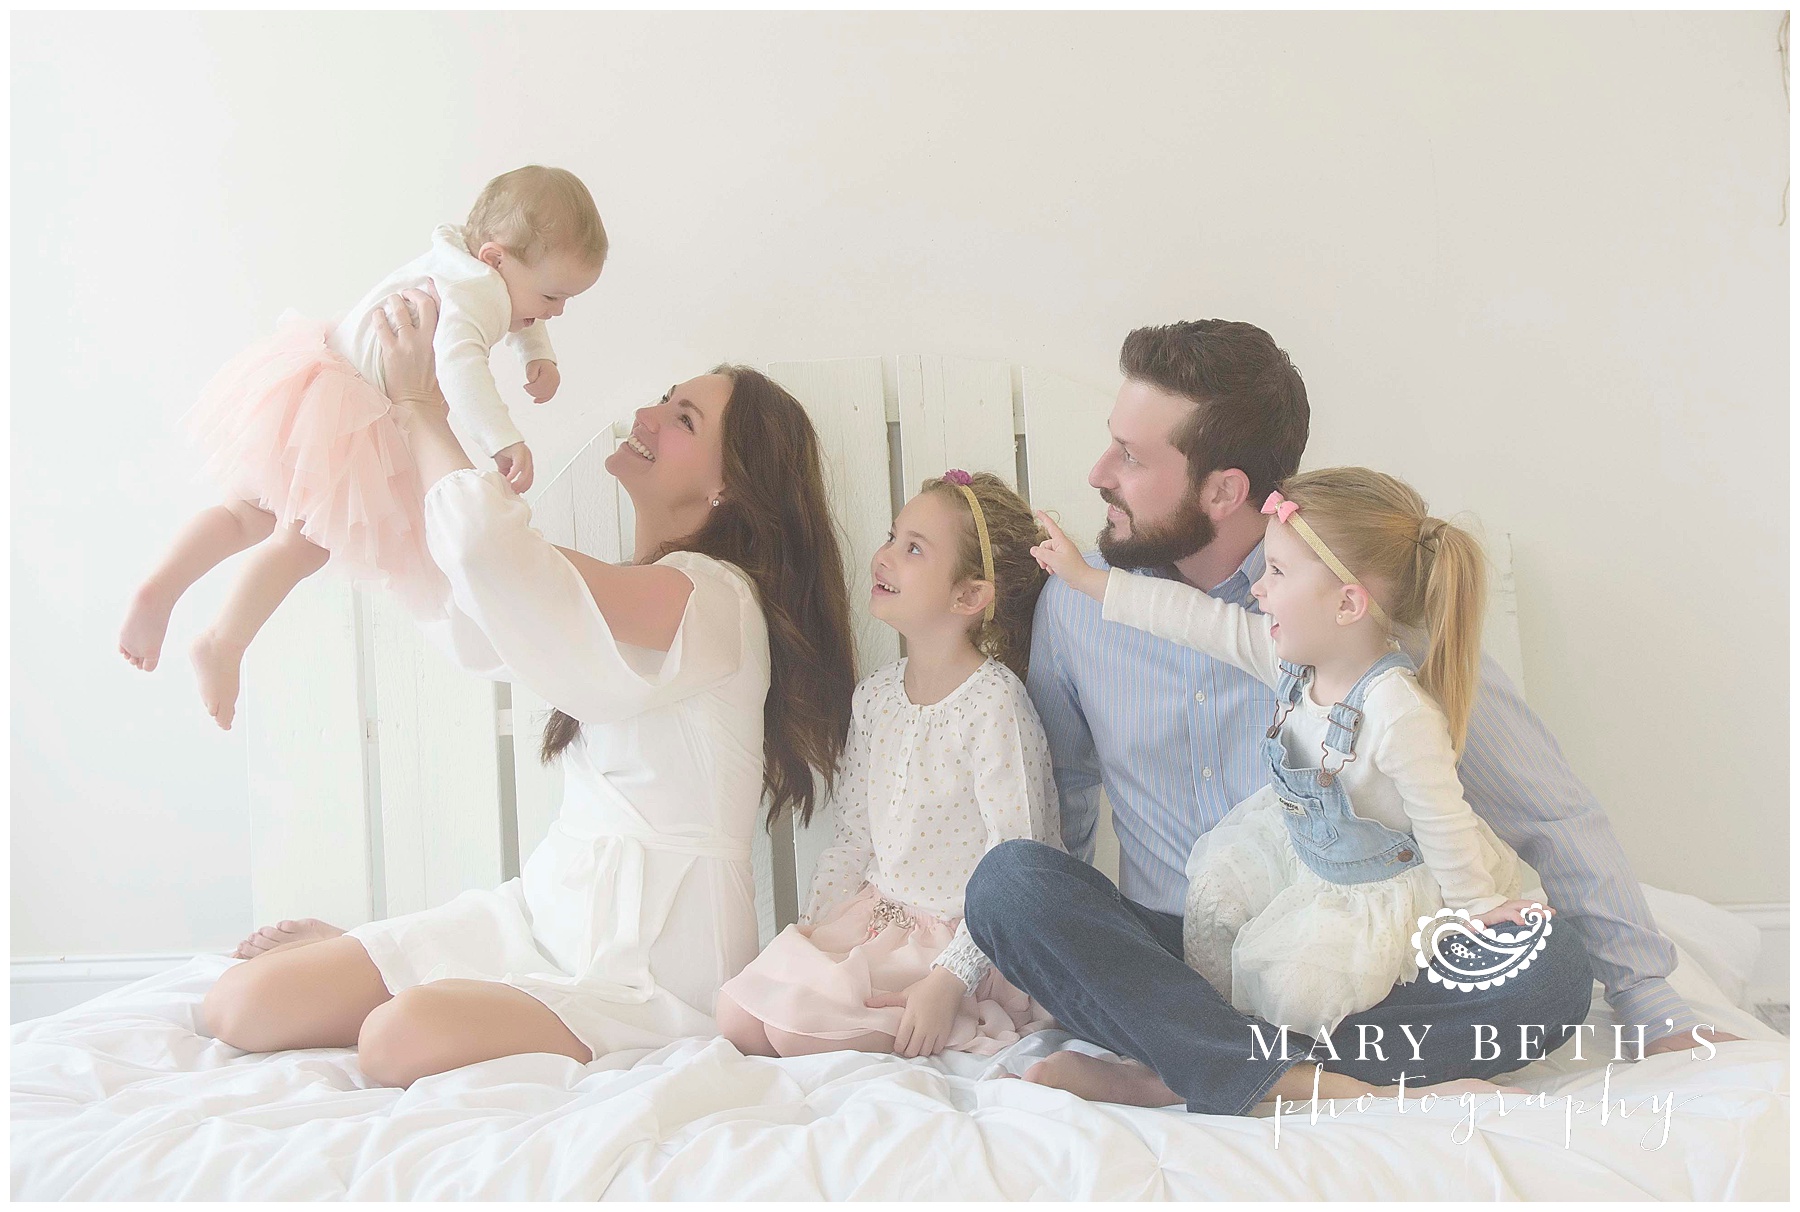 MaryBeths Photography - North Augusta Family and Newborn Session Photographer_0005.jpg